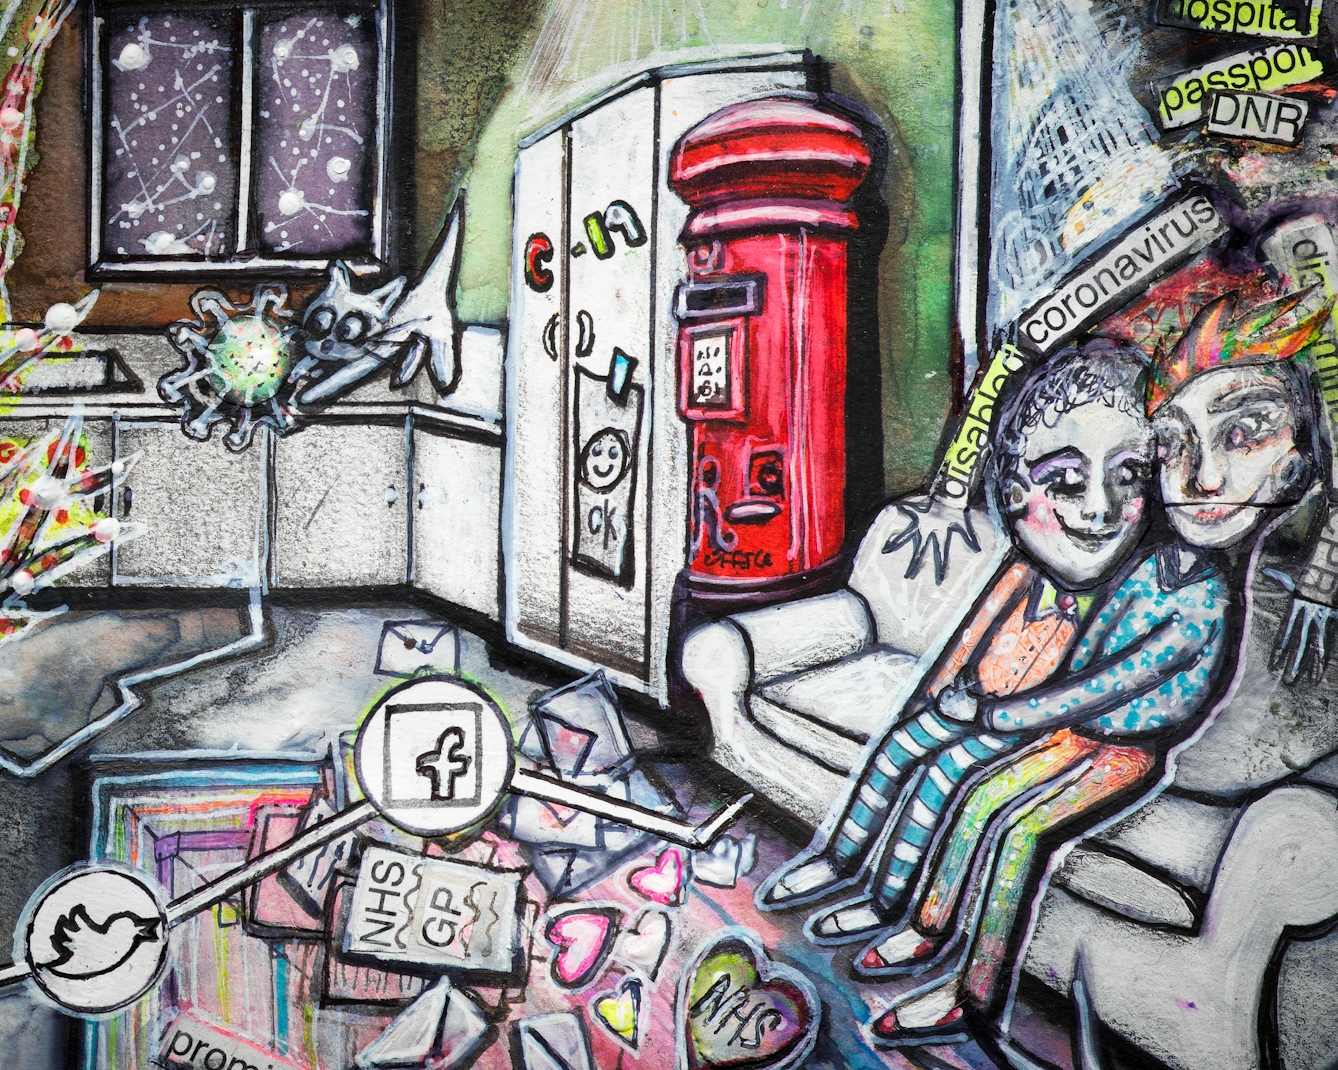 Artwork using watercolour and ink incorporating collaged words throughout the scene. The artwork shows a busy multi-coloured room separated by jagged white lines drawn across the floor incorporating social media icons in circles. On the right hand side of the image there is a red post box, and beside it a couple sit on a sofa cuddling with mail and love hearts around their feet. On the wall a picture frame has the words ‘DNR’, ‘hospital’ and ‘passport’. Two arms with the words ‘corona virus’ on them, reach out from the picture frame attempting to embrace the couple.